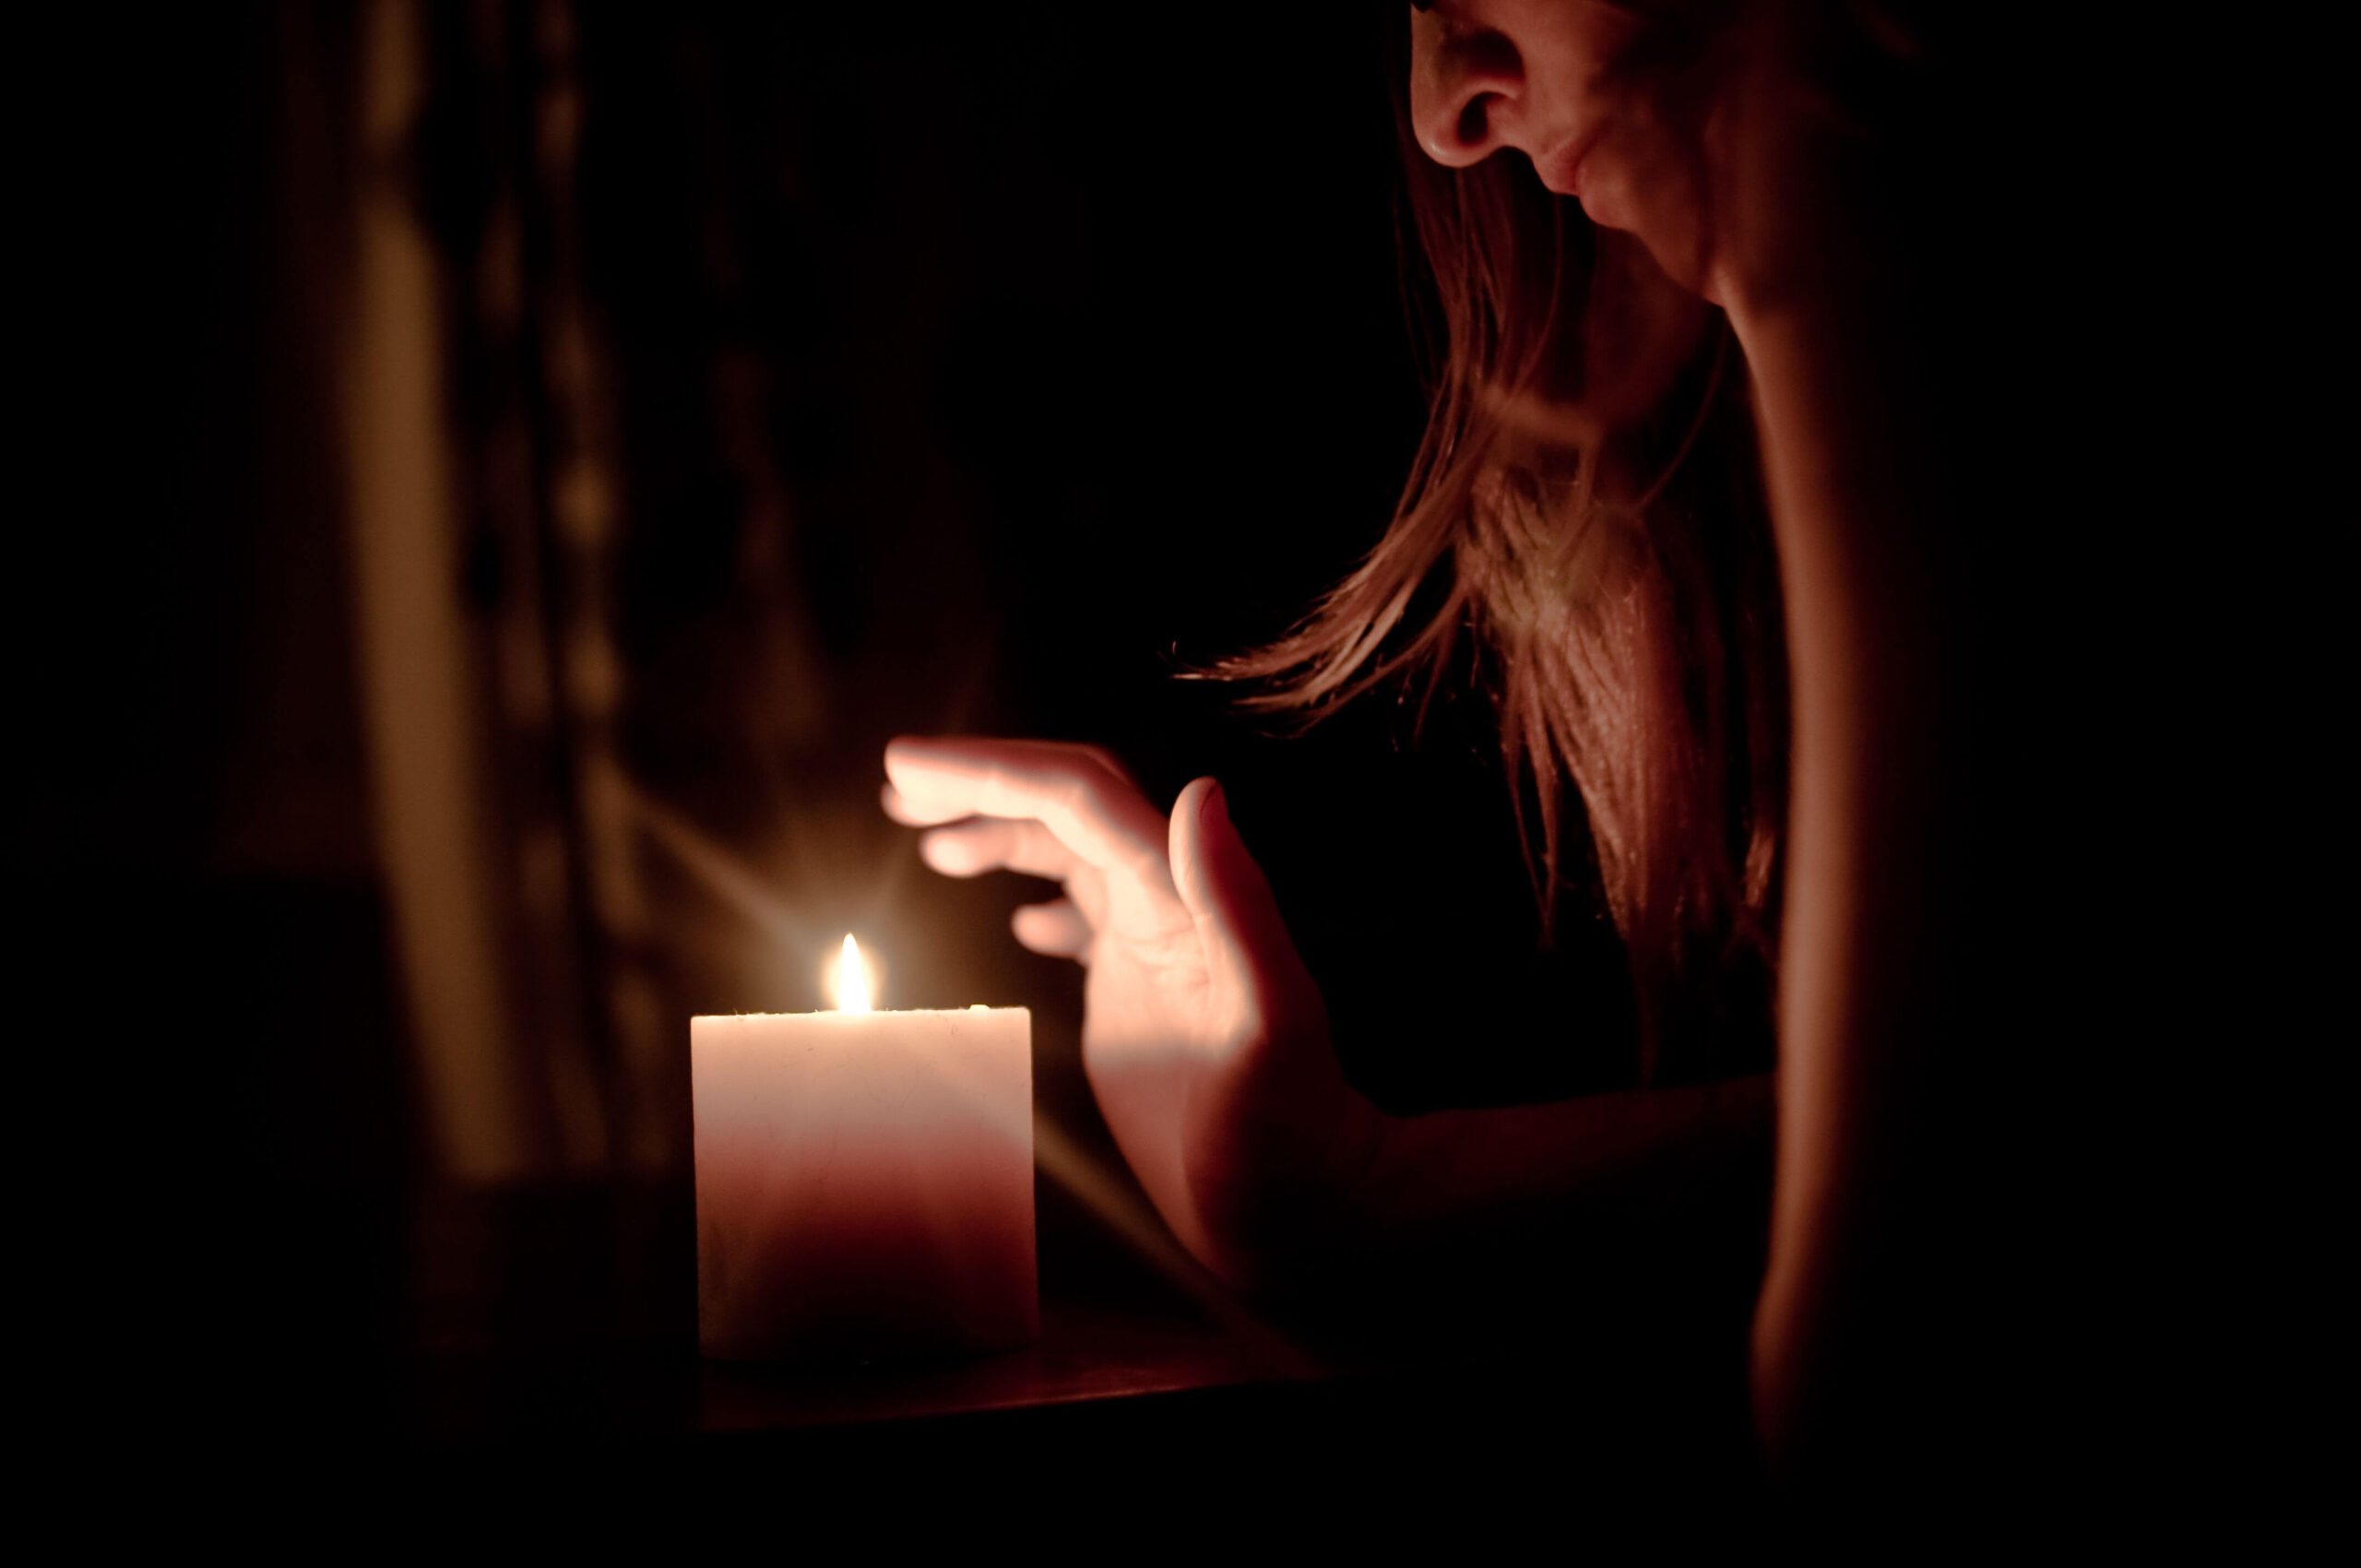 Candles-to-lighten-up-the-mood